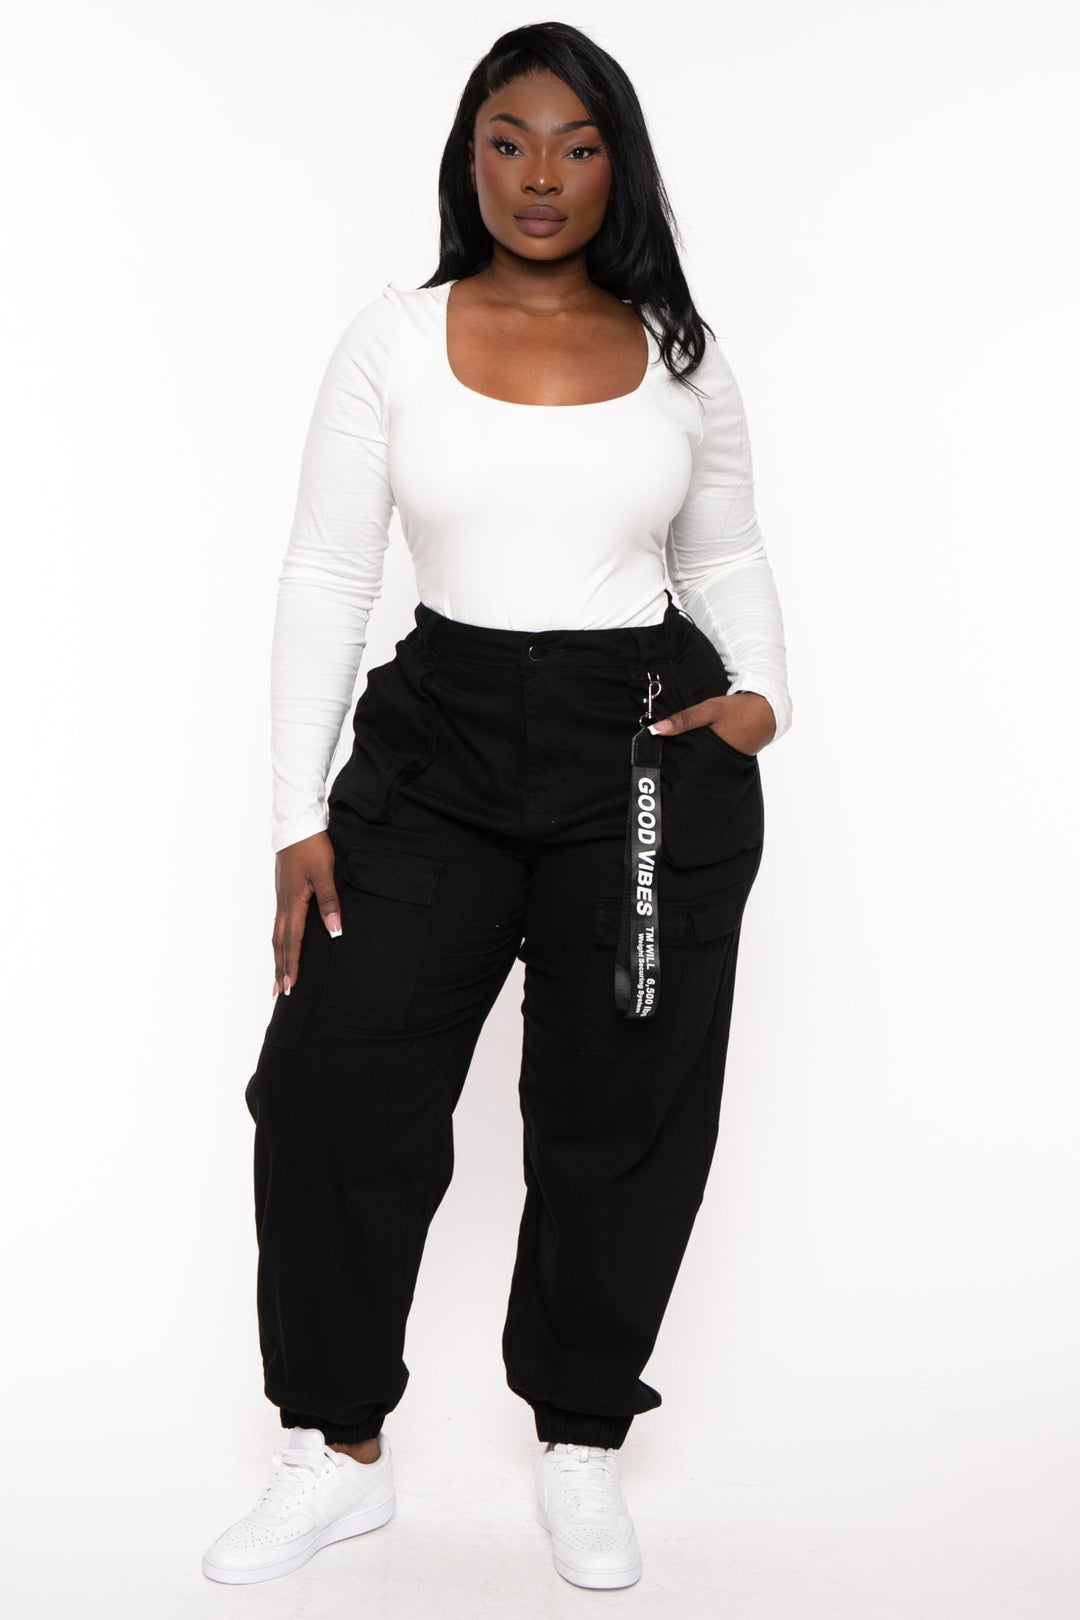 48 Wholesale Womens Plus Size Straight Leg Cargo Pants With Novelty Belt  Assorted Sizes 14-24 Black - at 